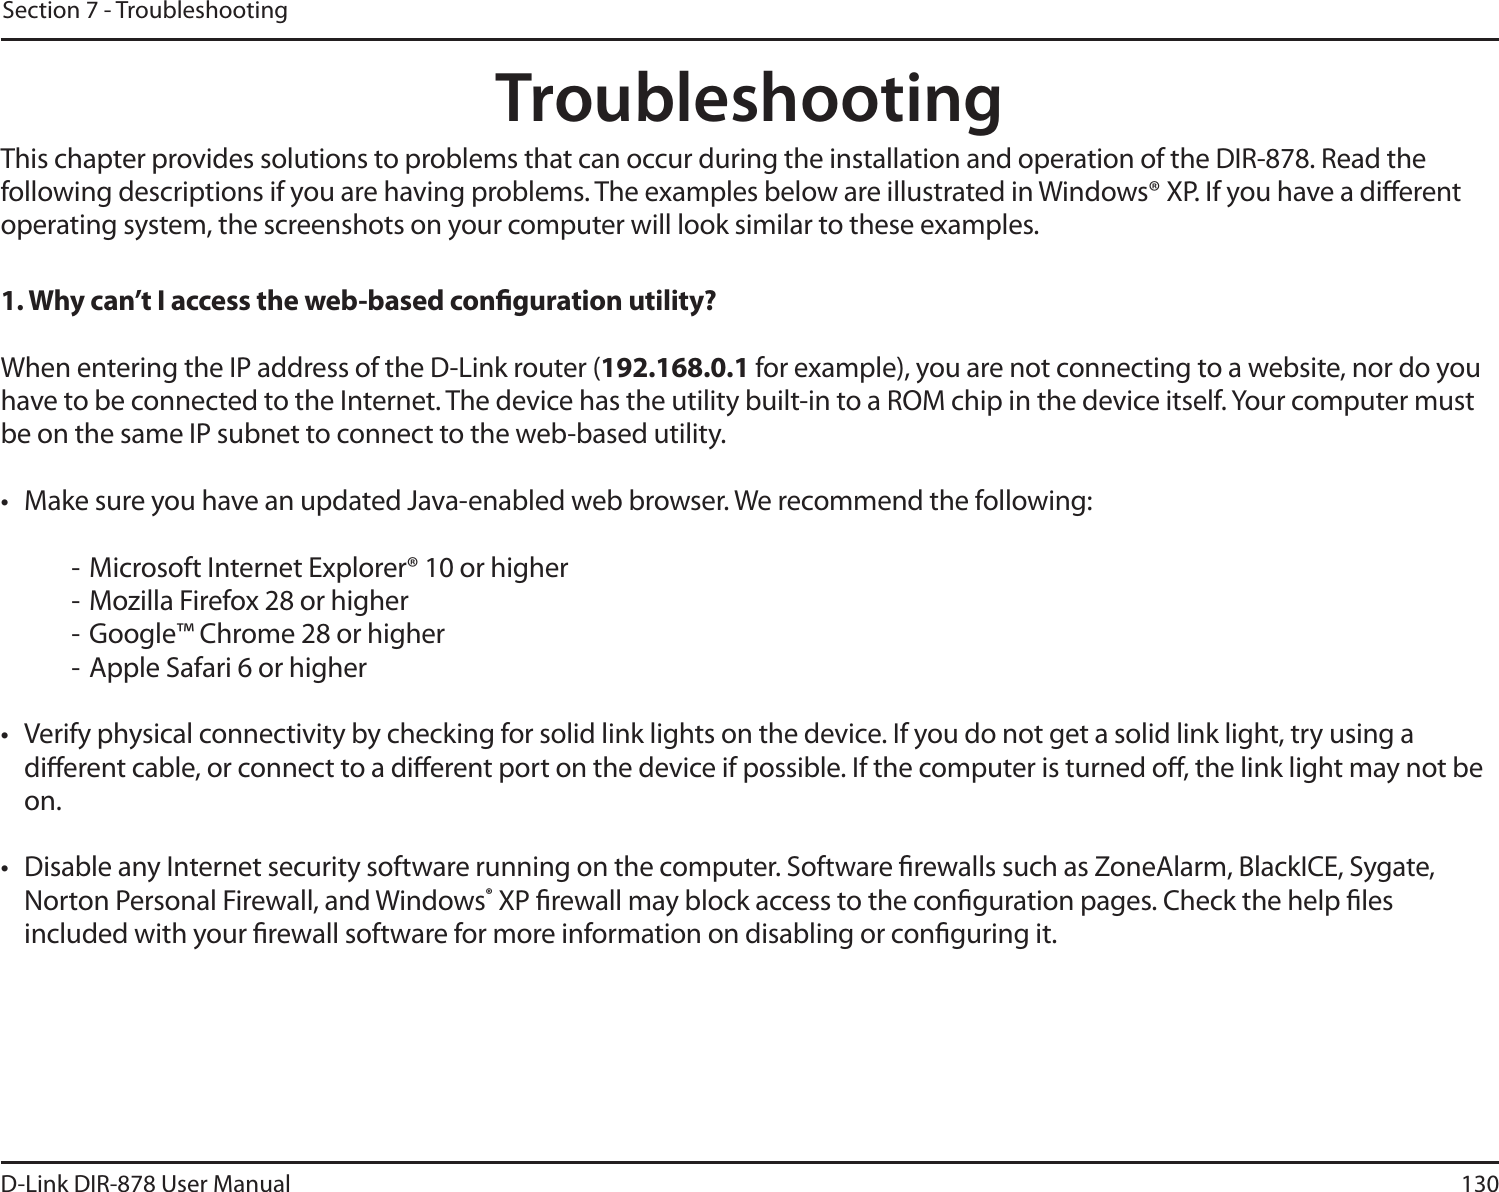 130D-Link DIR-878 User ManualSection 7 - TroubleshootingTroubleshootingThis chapter provides solutions to problems that can occur during the installation and operation of the DIR-878. Read the following descriptions if you are having problems. The examples below are illustrated in Windows® XP. If you have a dierent operating system, the screenshots on your computer will look similar to these examples.1. Why can’t I access the web-based conguration utility?When entering the IP address of the D-Link router (192.168.0.1 for example), you are not connecting to a website, nor do you have to be connected to the Internet. The device has the utility built-in to a ROM chip in the device itself. Your computer must be on the same IP subnet to connect to the web-based utility. t .BLFTVSFZPVIBWFBOVQEBUFE+BWBFOBCMFEXFCCSPXTFS8FSFDPNNFOEUIFGPMMPXJOH- Microsoft Internet Explorer® 10 or higher- Mozilla Firefox 28 or higher- Google™ Chrome 28 or higher- Apple Safari 6 or highert 7FSJGZQIZTJDBMDPOOFDUJWJUZCZDIFDLJOHGPSTPMJEMJOLMJHIUTPOUIFEFWJDF*GZPVEPOPUHFUBTPMJEMJOLMJHIUUSZVTJOHBdierent cable, or connect to a dierent port on the device if possible. If the computer is turned o, the link light may not be on.t %JTBCMFBOZ*OUFSOFUTFDVSJUZTPGUXBSFSVOOJOHPOUIFDPNQVUFS4PGUXBSFöSFXBMMTTVDIBT;POF&quot;MBSN#MBDL*$&amp;4ZHBUFNorton Personal Firewall, and Windows® XP rewall may block access to the conguration pages. Check the help les included with your rewall software for more information on disabling or conguring it.